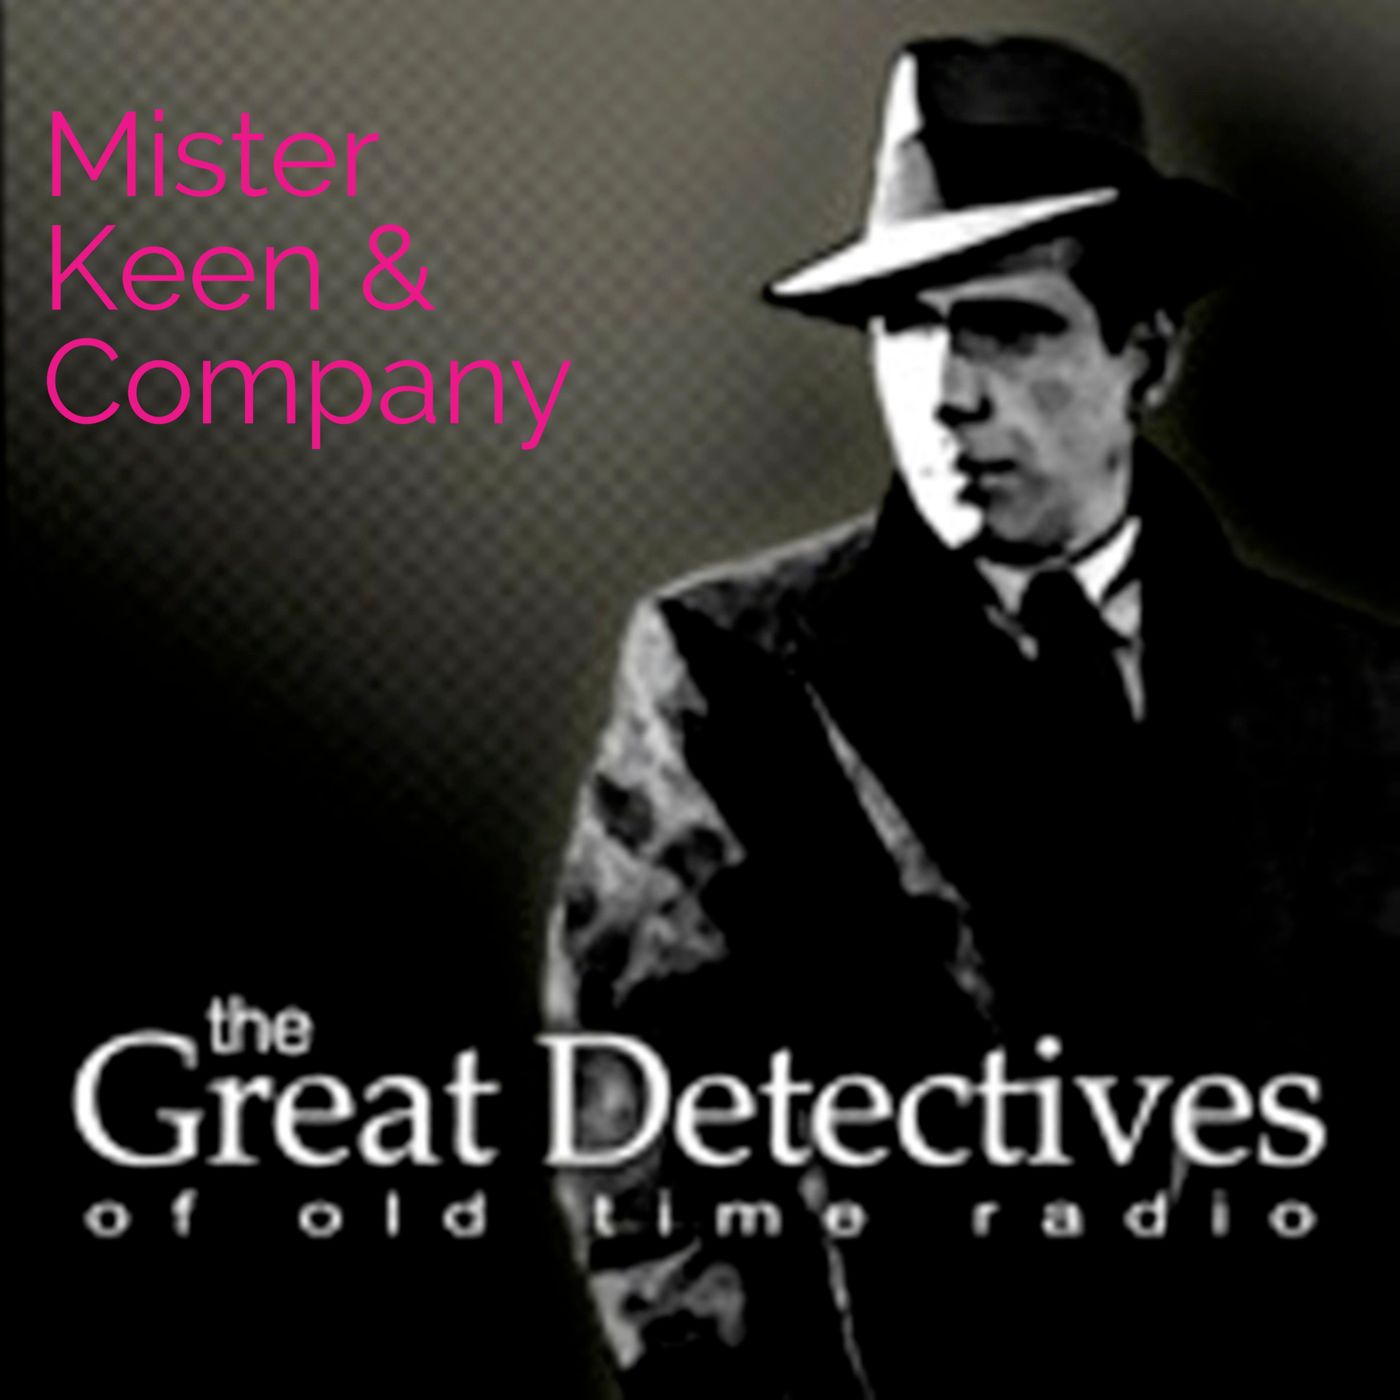 EP2679: Mister Keen: The Case of Murder and the Missing Car